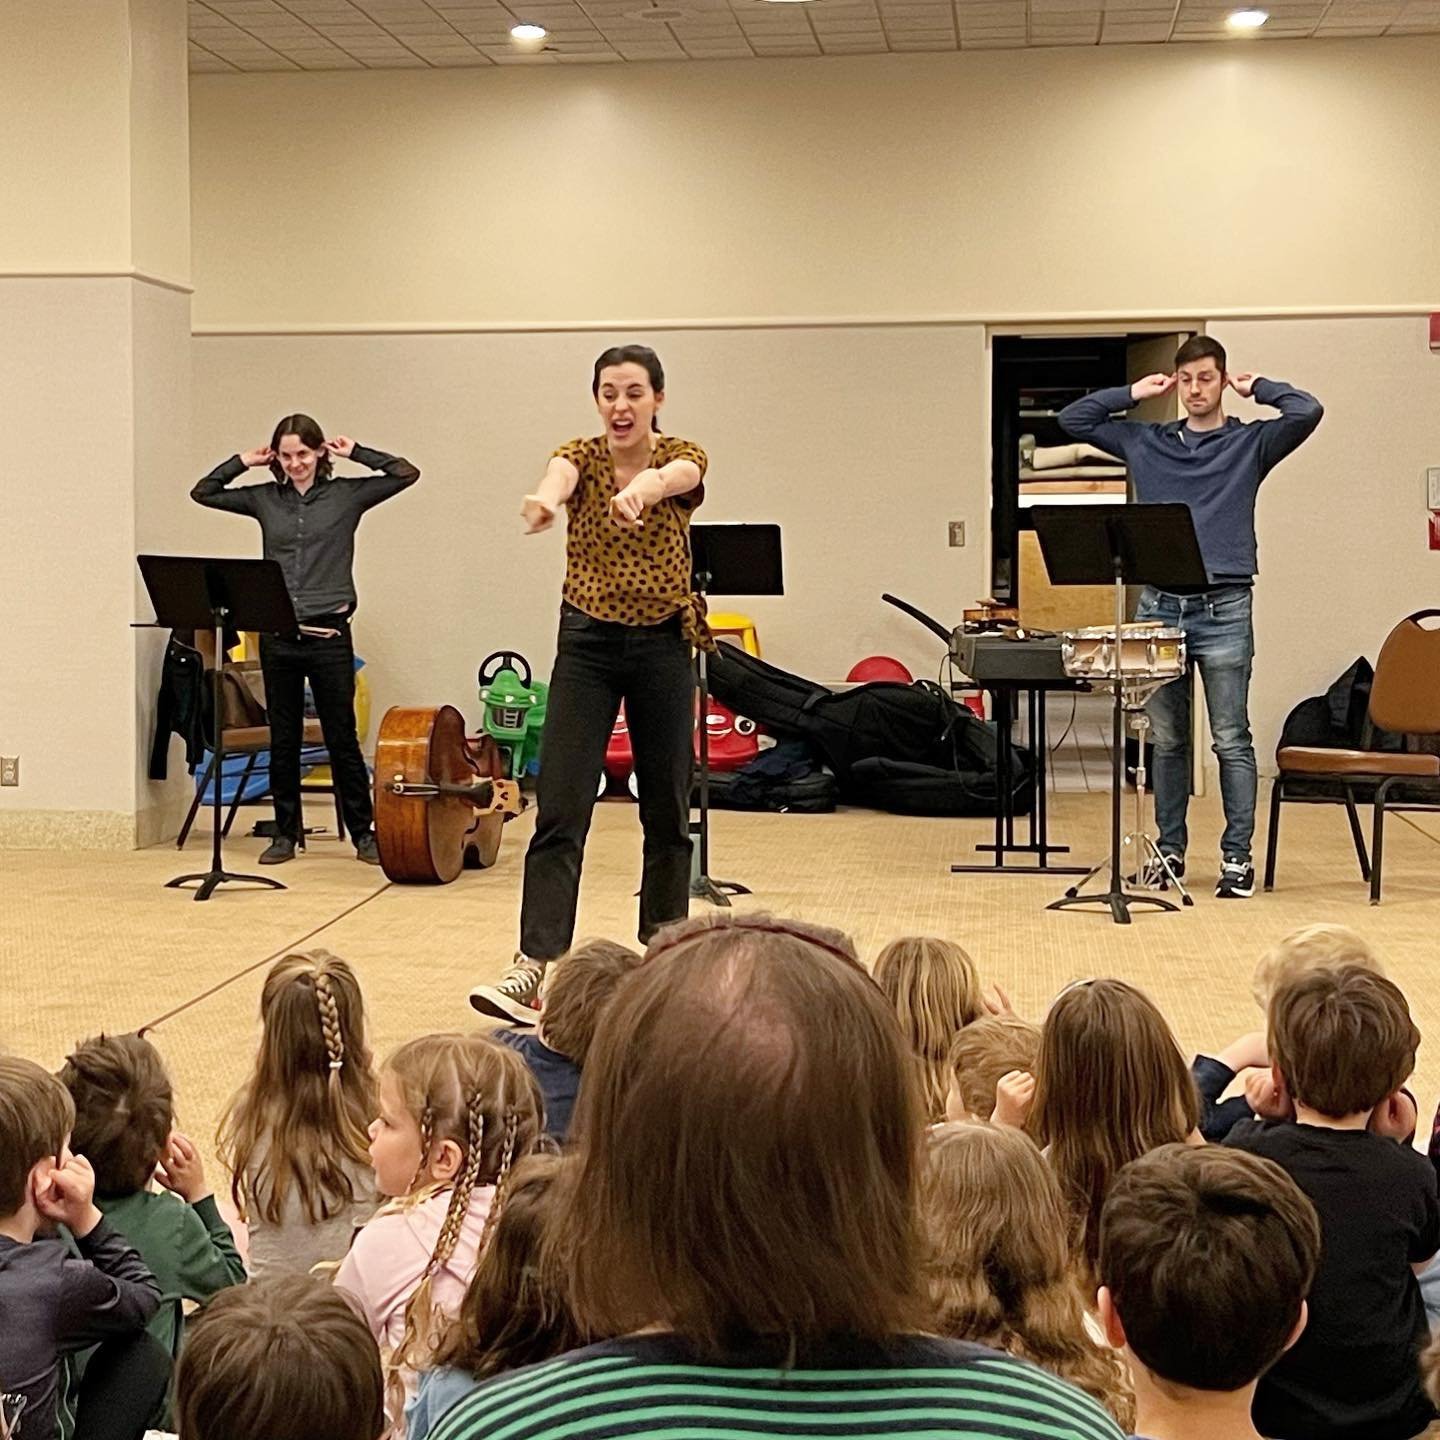 Rare footage of my full-on Dr. Jekyll preschool mode. Having a blast featuring @theknightsnyc this concert season. Big thanks to @lizzieburns and #iansullivan for clarifying where our &ldquo;listening ears&rdquo; are 🤣